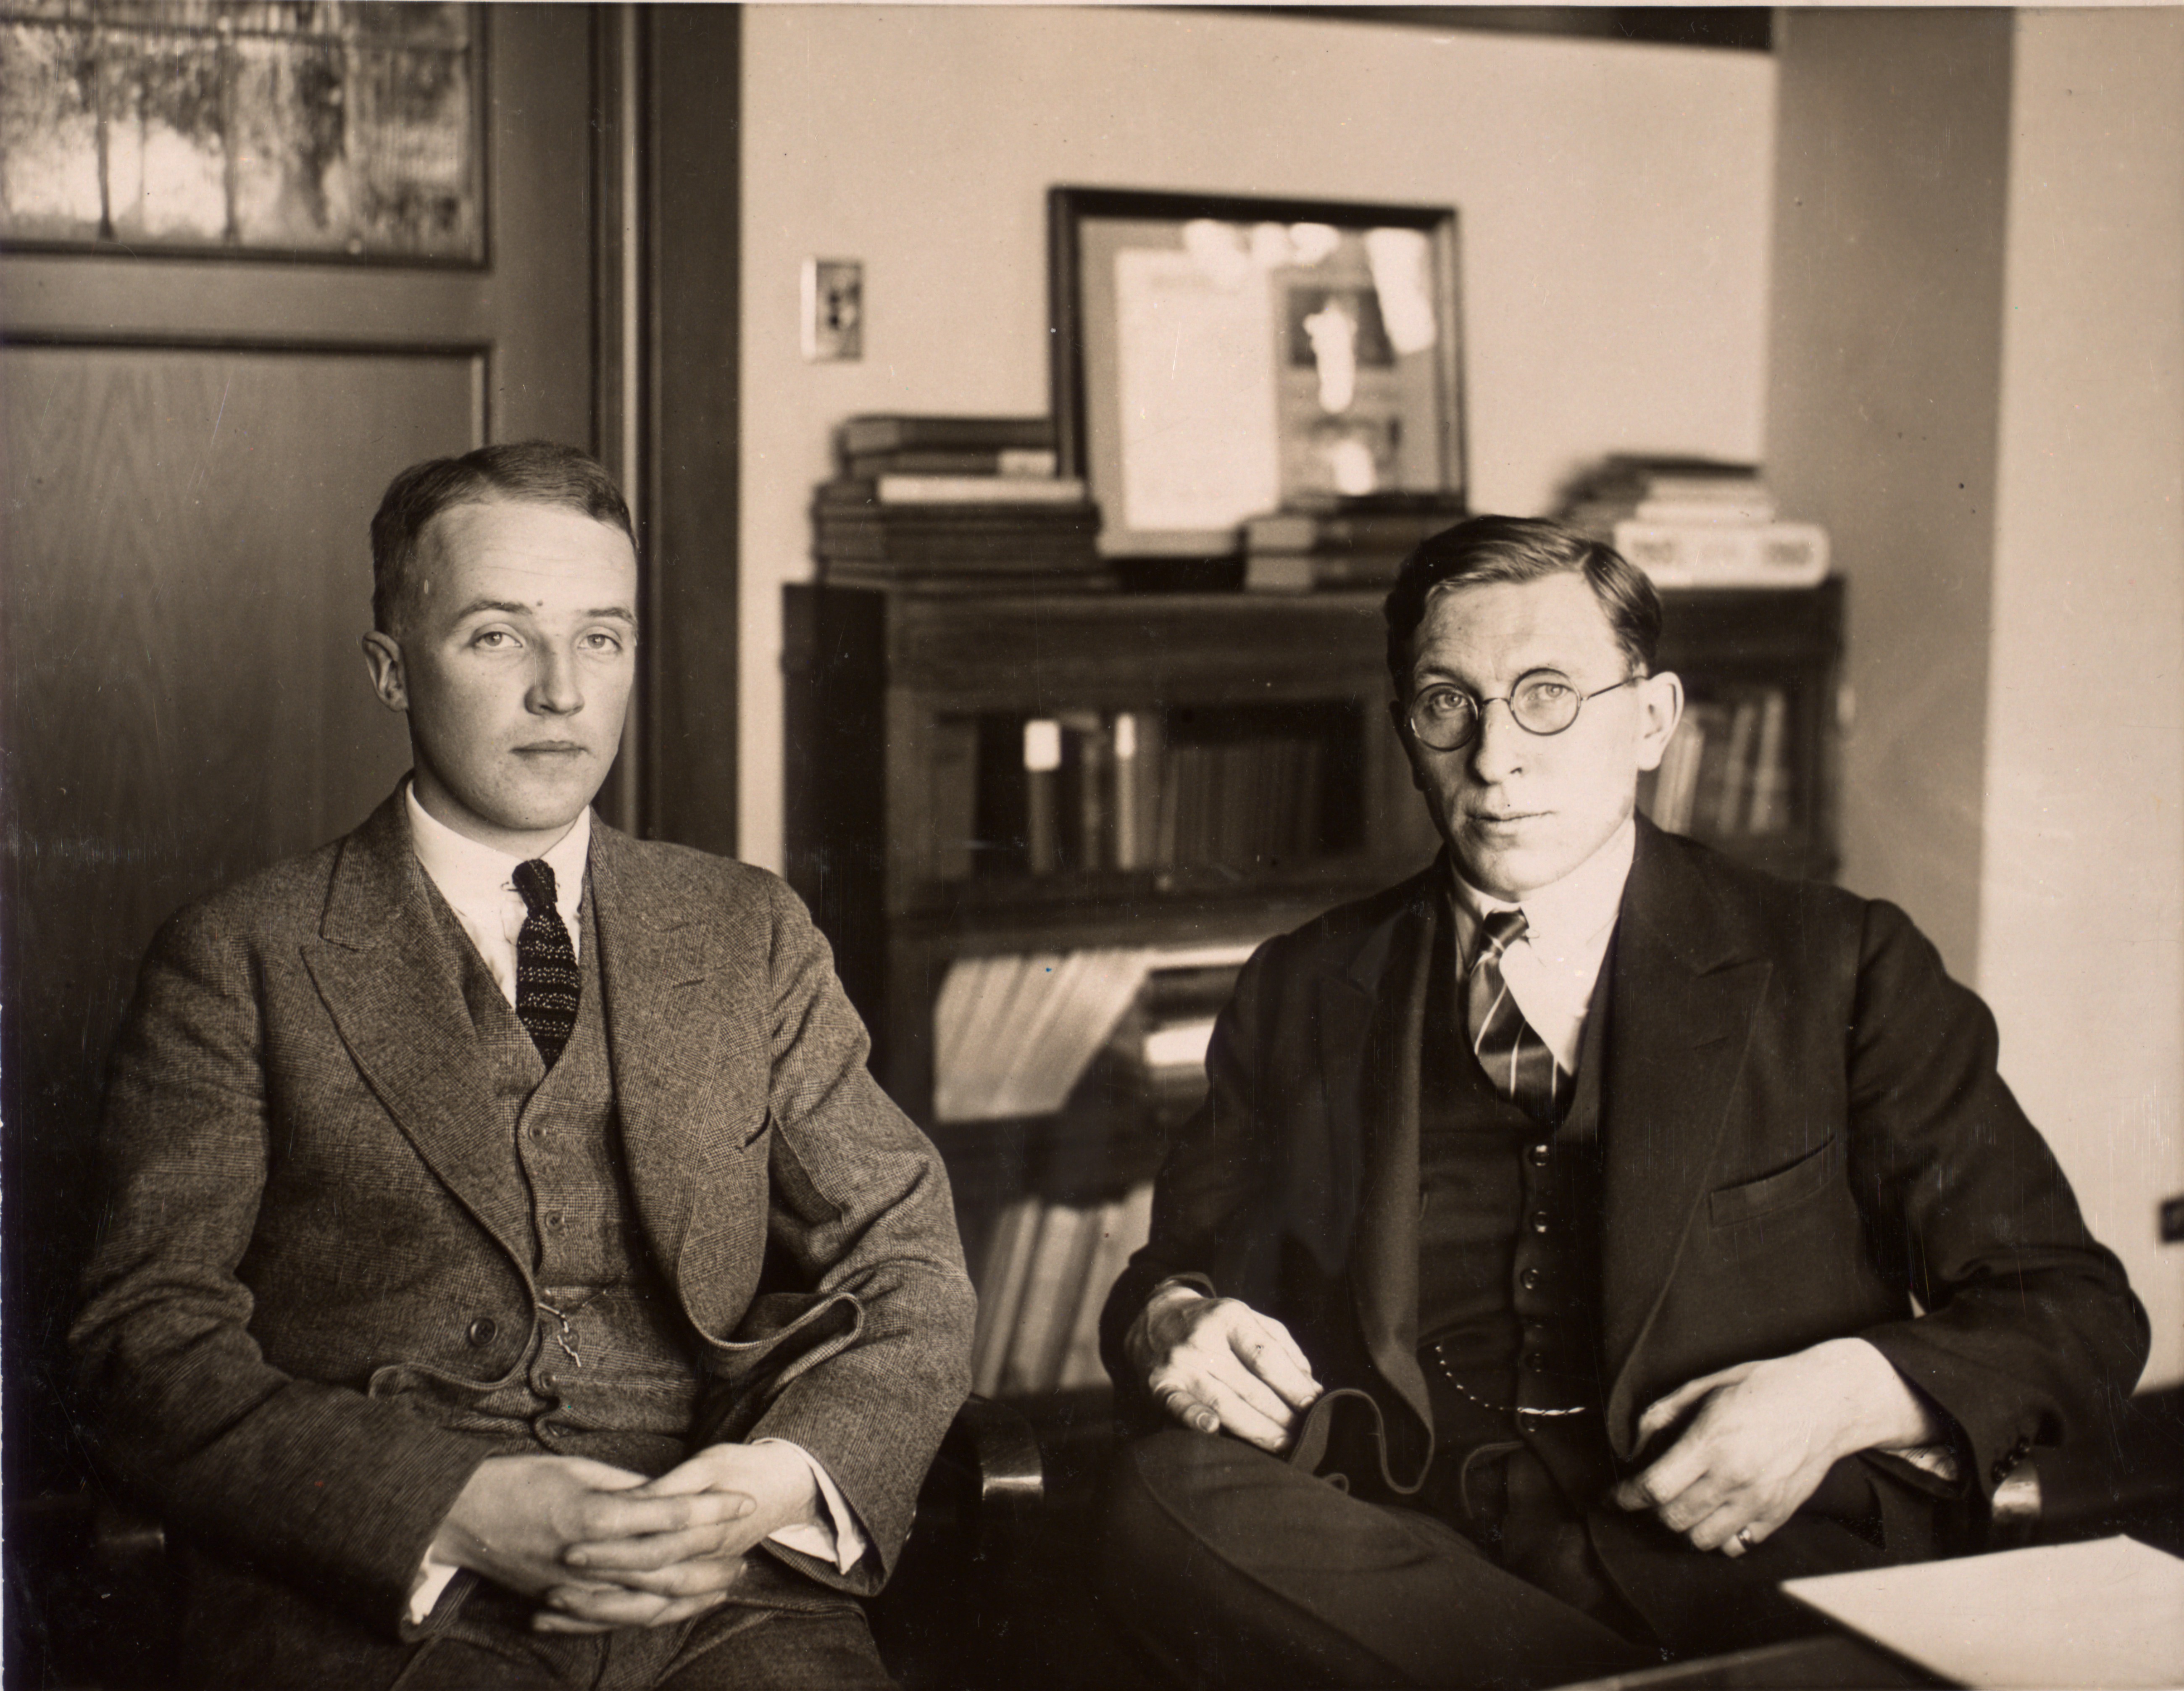 Photograph of C. H. Best and F. G. Banting ca. 1924